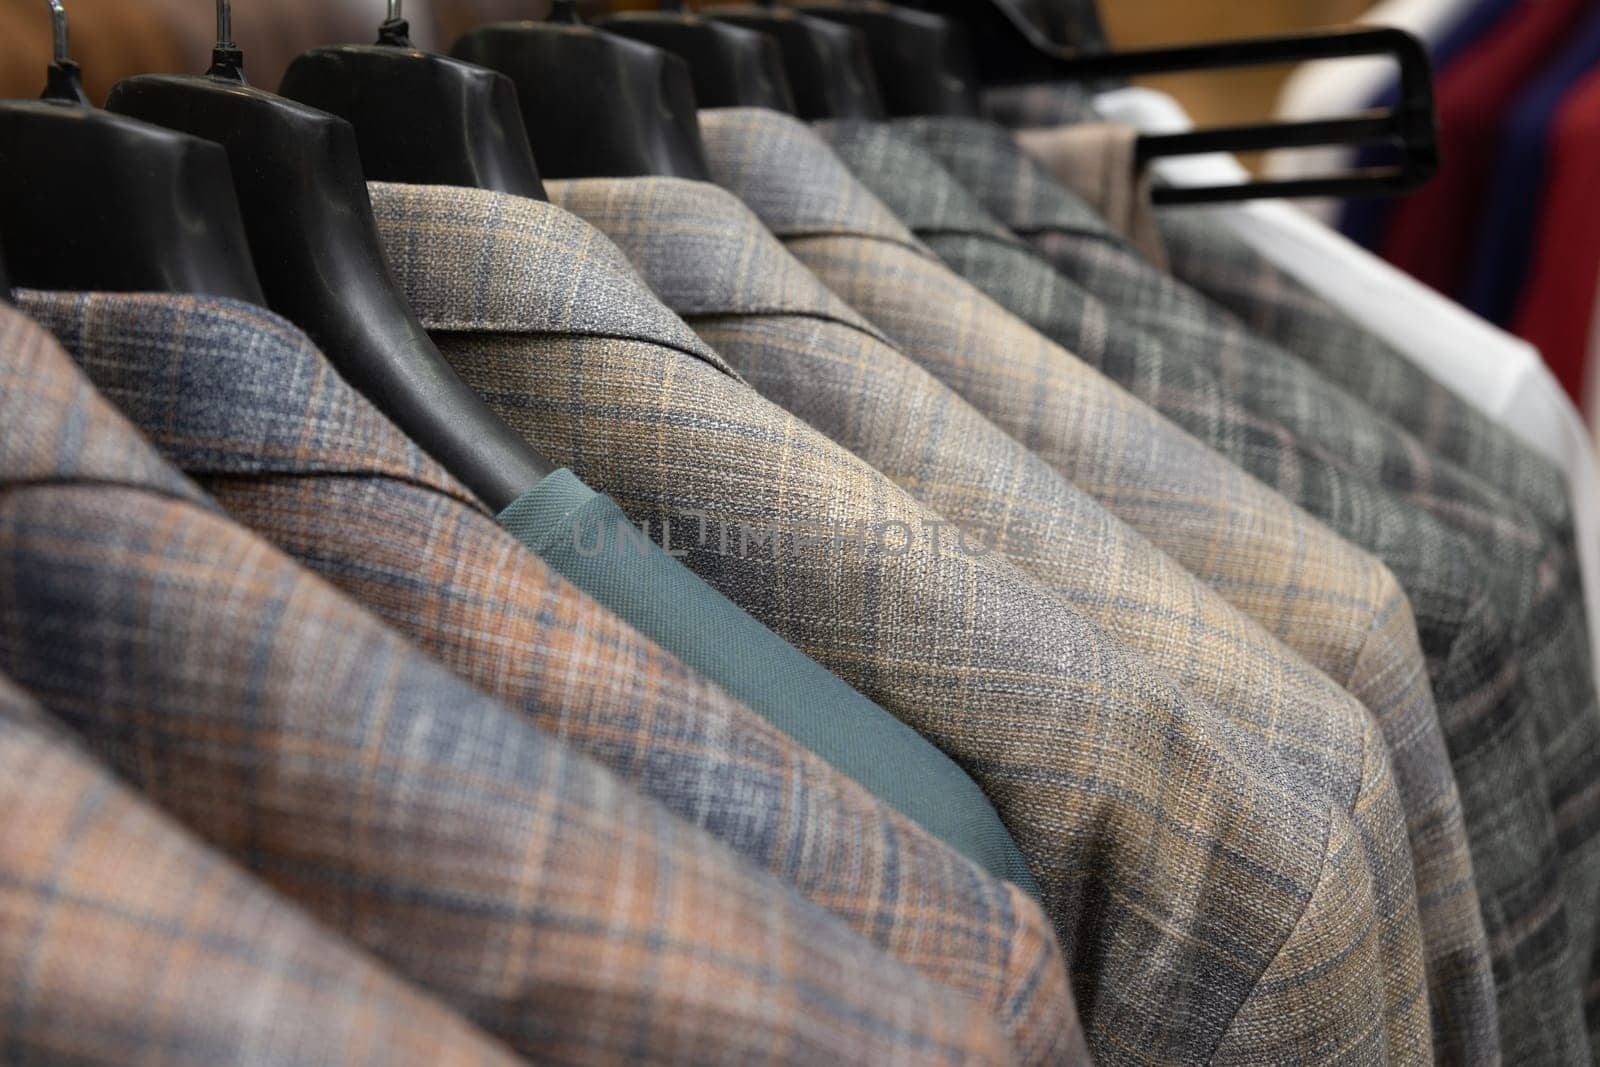 A row of men's suits, jackets hanging on a rack for display. Elegant man suit jackets hanging in a row with close up of sleeve and buttons.